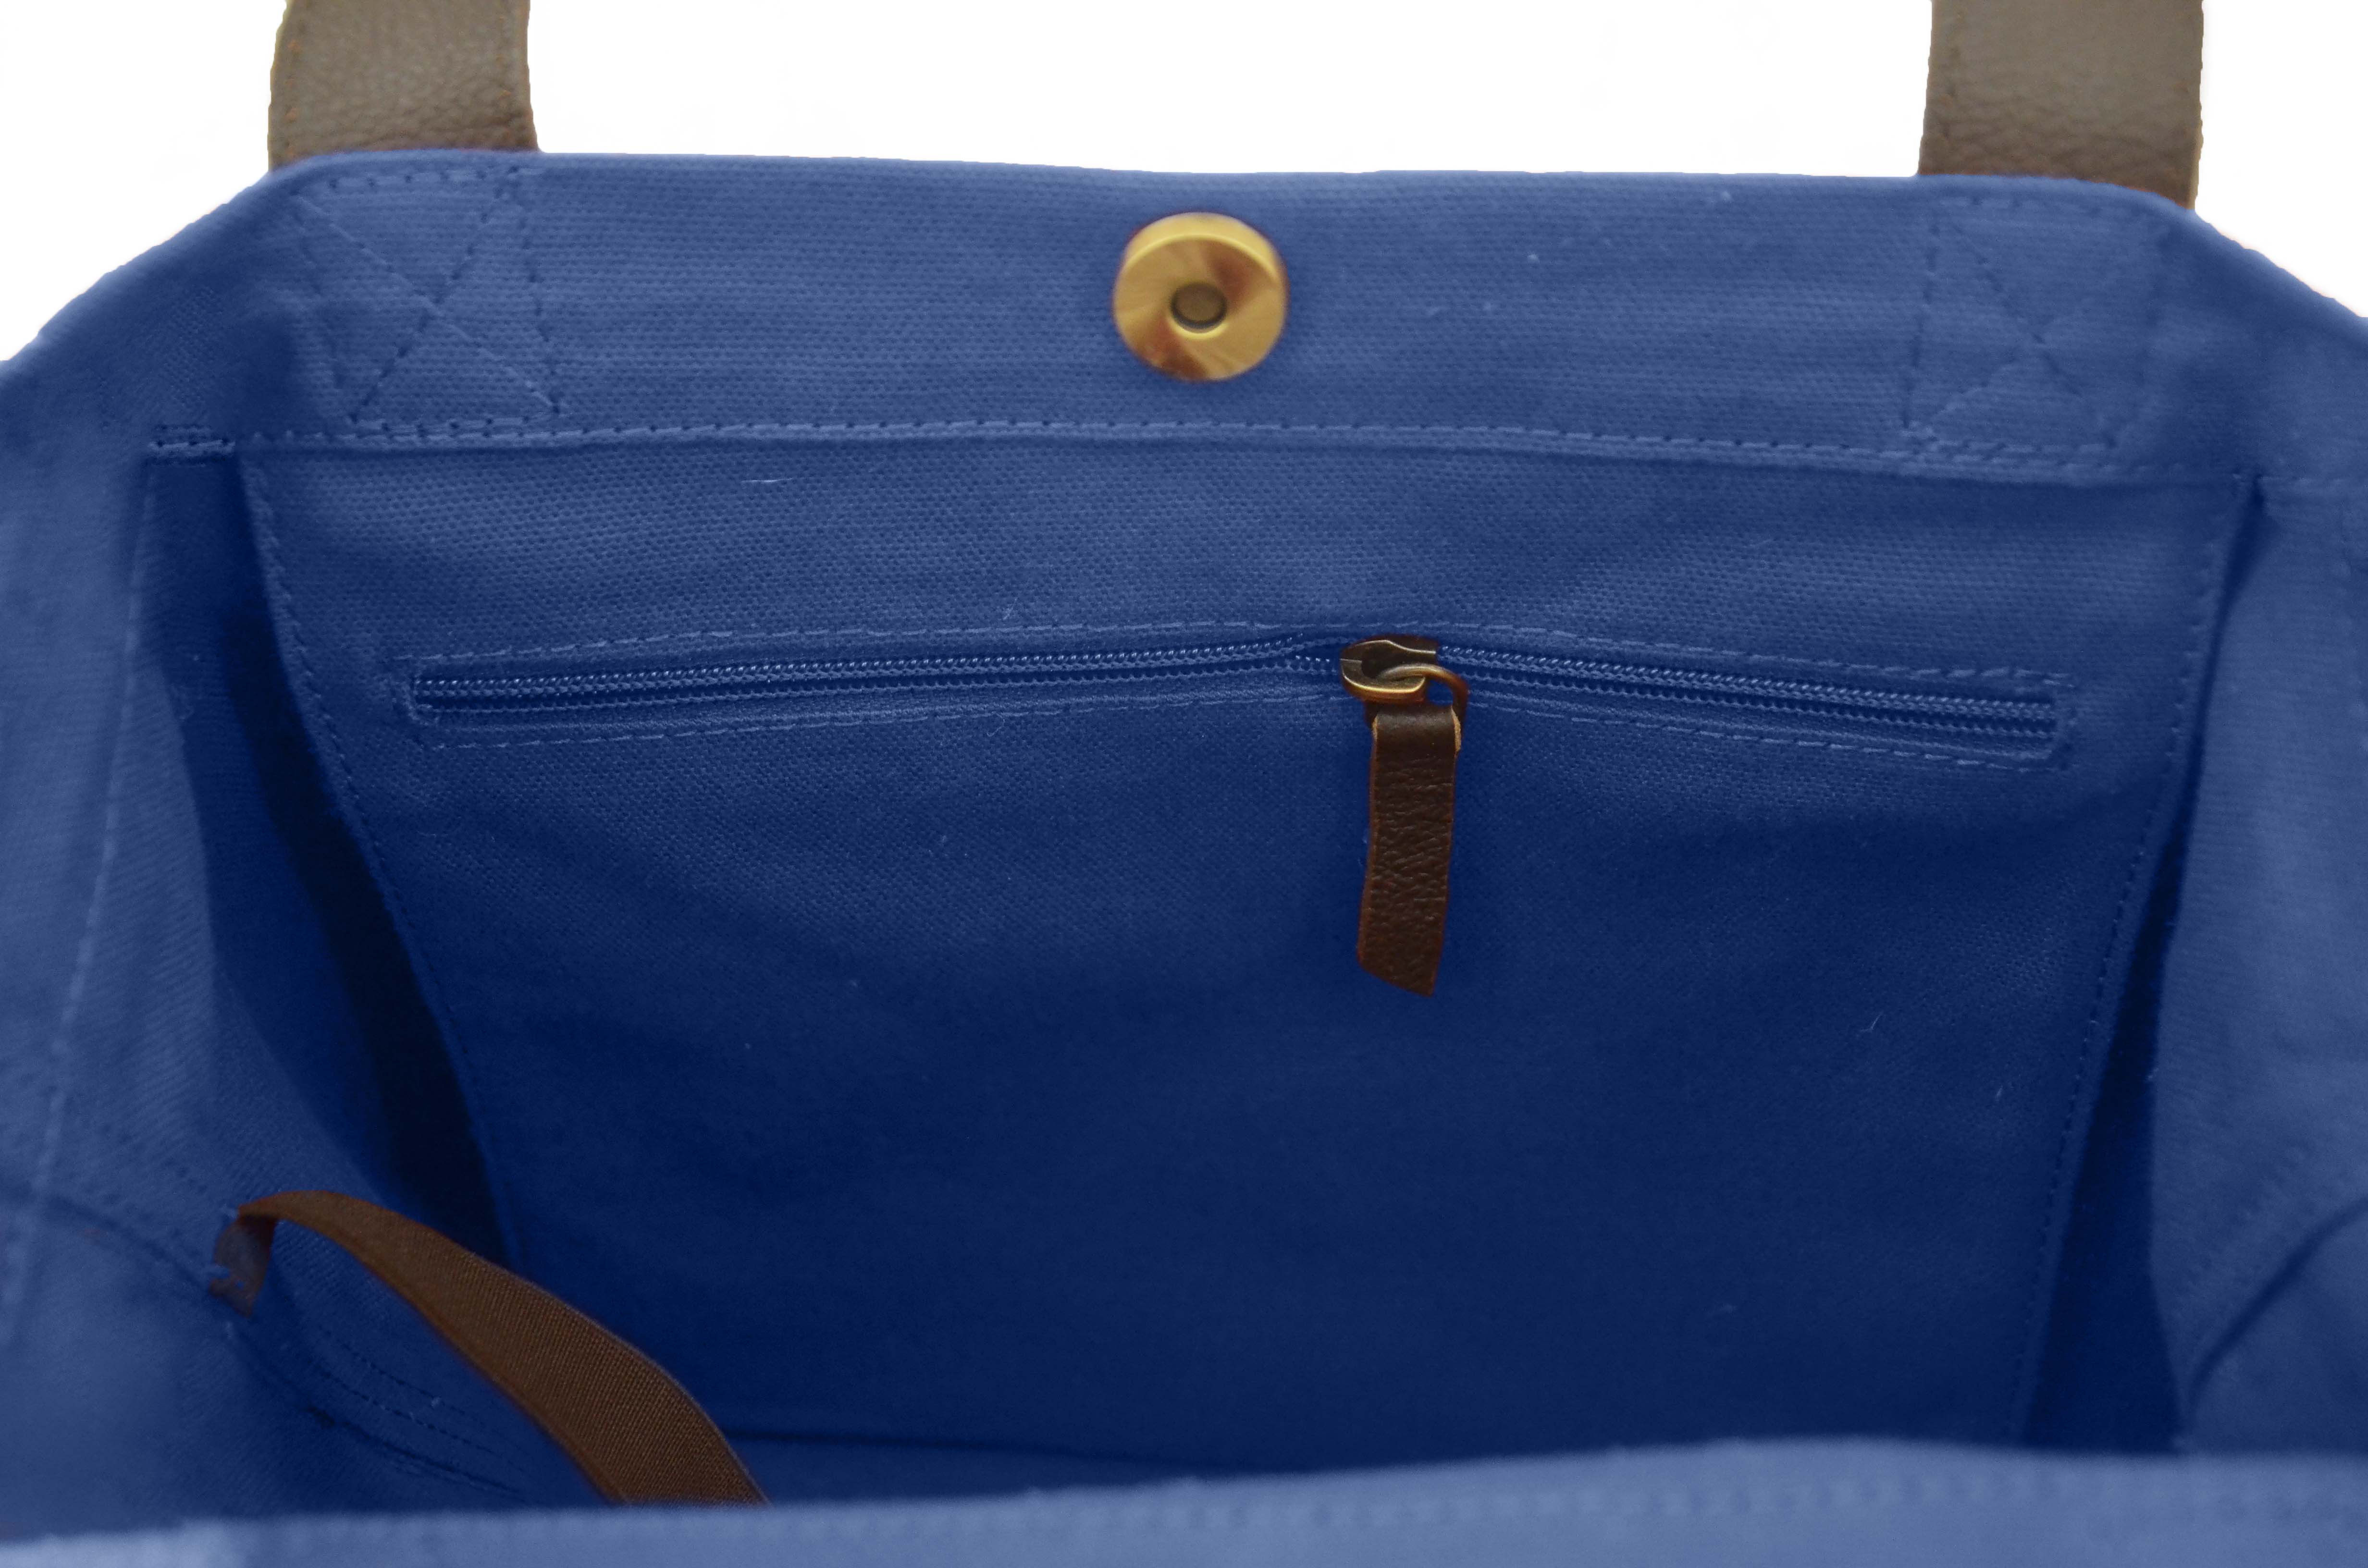 Canvas Tote Bag with Leather Handles